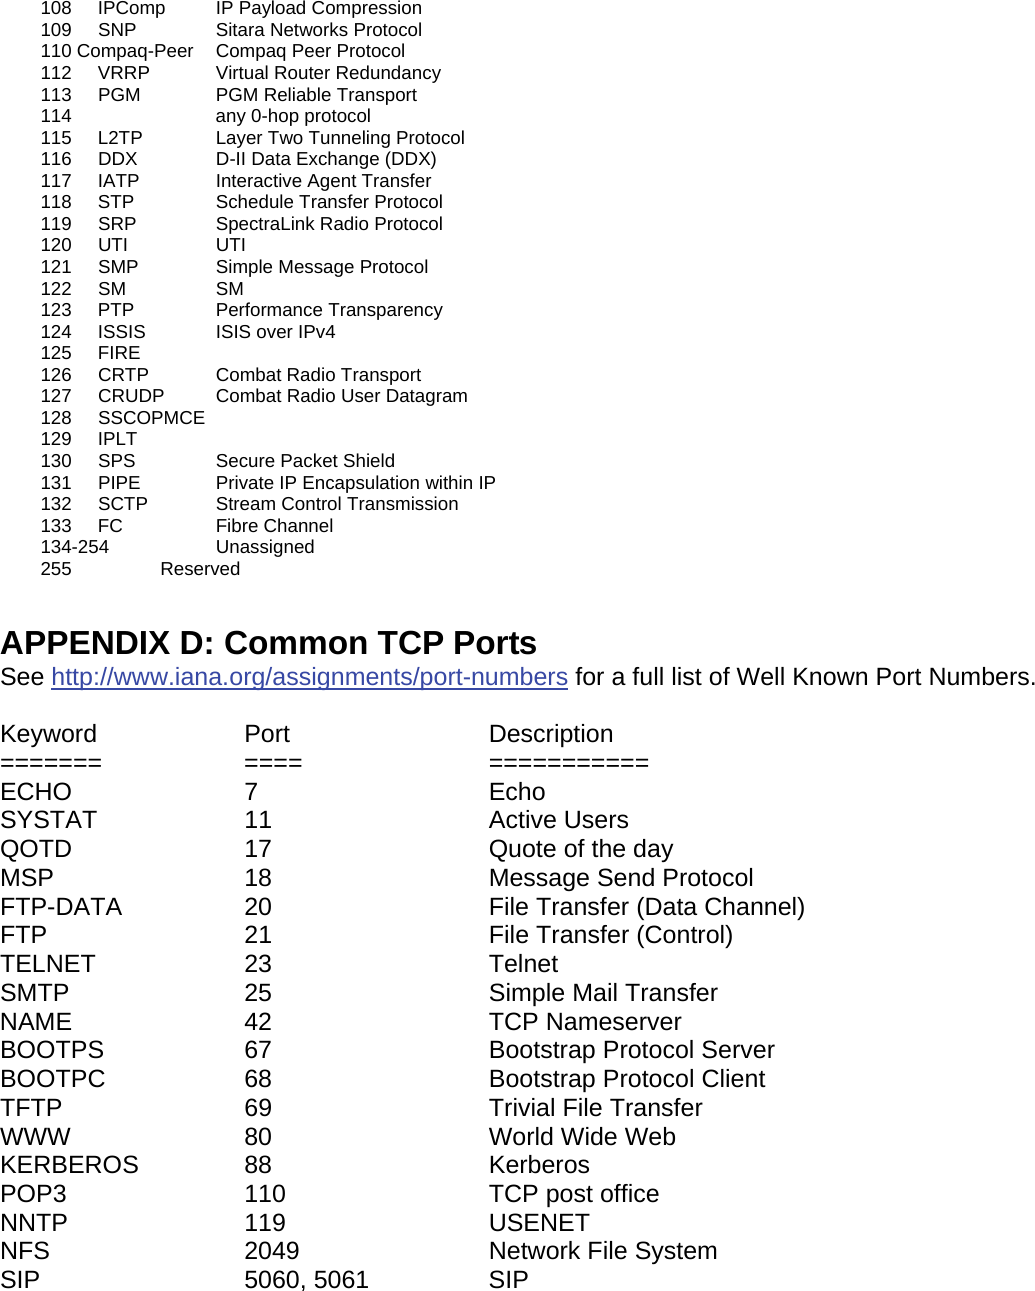                      APPENDIX D: Common TCP Ports  See http://www.iana.org/assignments/port-numbers for a full list of Well Known Port Numbers.  Keyword    Port    Description =======      ====  =========== ECHO   7   Echo SYSTAT   11   Active Users QOTD   17   Quote of the day MSP   18   Message Send Protocol FTP-DATA   20  File Transfer (Data Channel) FTP   21   File Transfer (Control) TELNET   23   Telnet SMTP   25   Simple Mail Transfer NAME   42   TCP Nameserver BOOTPS   67   Bootstrap Protocol Server BOOTPC   68   Bootstrap Protocol Client TFTP   69   Trivial File Transfer WWW   80   World Wide Web KERBEROS 88  Kerberos POP3   110   TCP post office NNTP   119   USENET NFS   2049   Network File System SIP  5060, 5061  SIP     108     IPComp        IP Payload Compression     109     SNP           Sitara Networks Protocol    110 Compaq-Peer  Compaq Peer Protocol    112     VRRP          Virtual Router Redundancy     113     PGM           PGM Reliable Transport     114                   any 0-hop protocol    115     L2TP          Layer Two Tunneling Protocol    116     DDX           D-II Data Exchange (DDX)    117     IATP          Interactive Agent Transfer     118     STP           Schedule Transfer Protocol    119     SRP           SpectraLink Radio Protocol    120     UTI           UTI    121     SMP           Simple Message Protocol    122     SM            SM    123     PTP           Performance Transparency     124     ISSIS  ISIS over IPv4    125     FIRE    126     CRTP          Combat Radio Transport     127     CRUDP         Combat Radio User Datagram    128     SSCOPMCE    129     IPLT    130     SPS           Secure Packet Shield    131     PIPE          Private IP Encapsulation within IP    132     SCTP          Stream Control Transmission     133     FC            Fibre Channel    134-254               Unassigned    255                 Reserved 